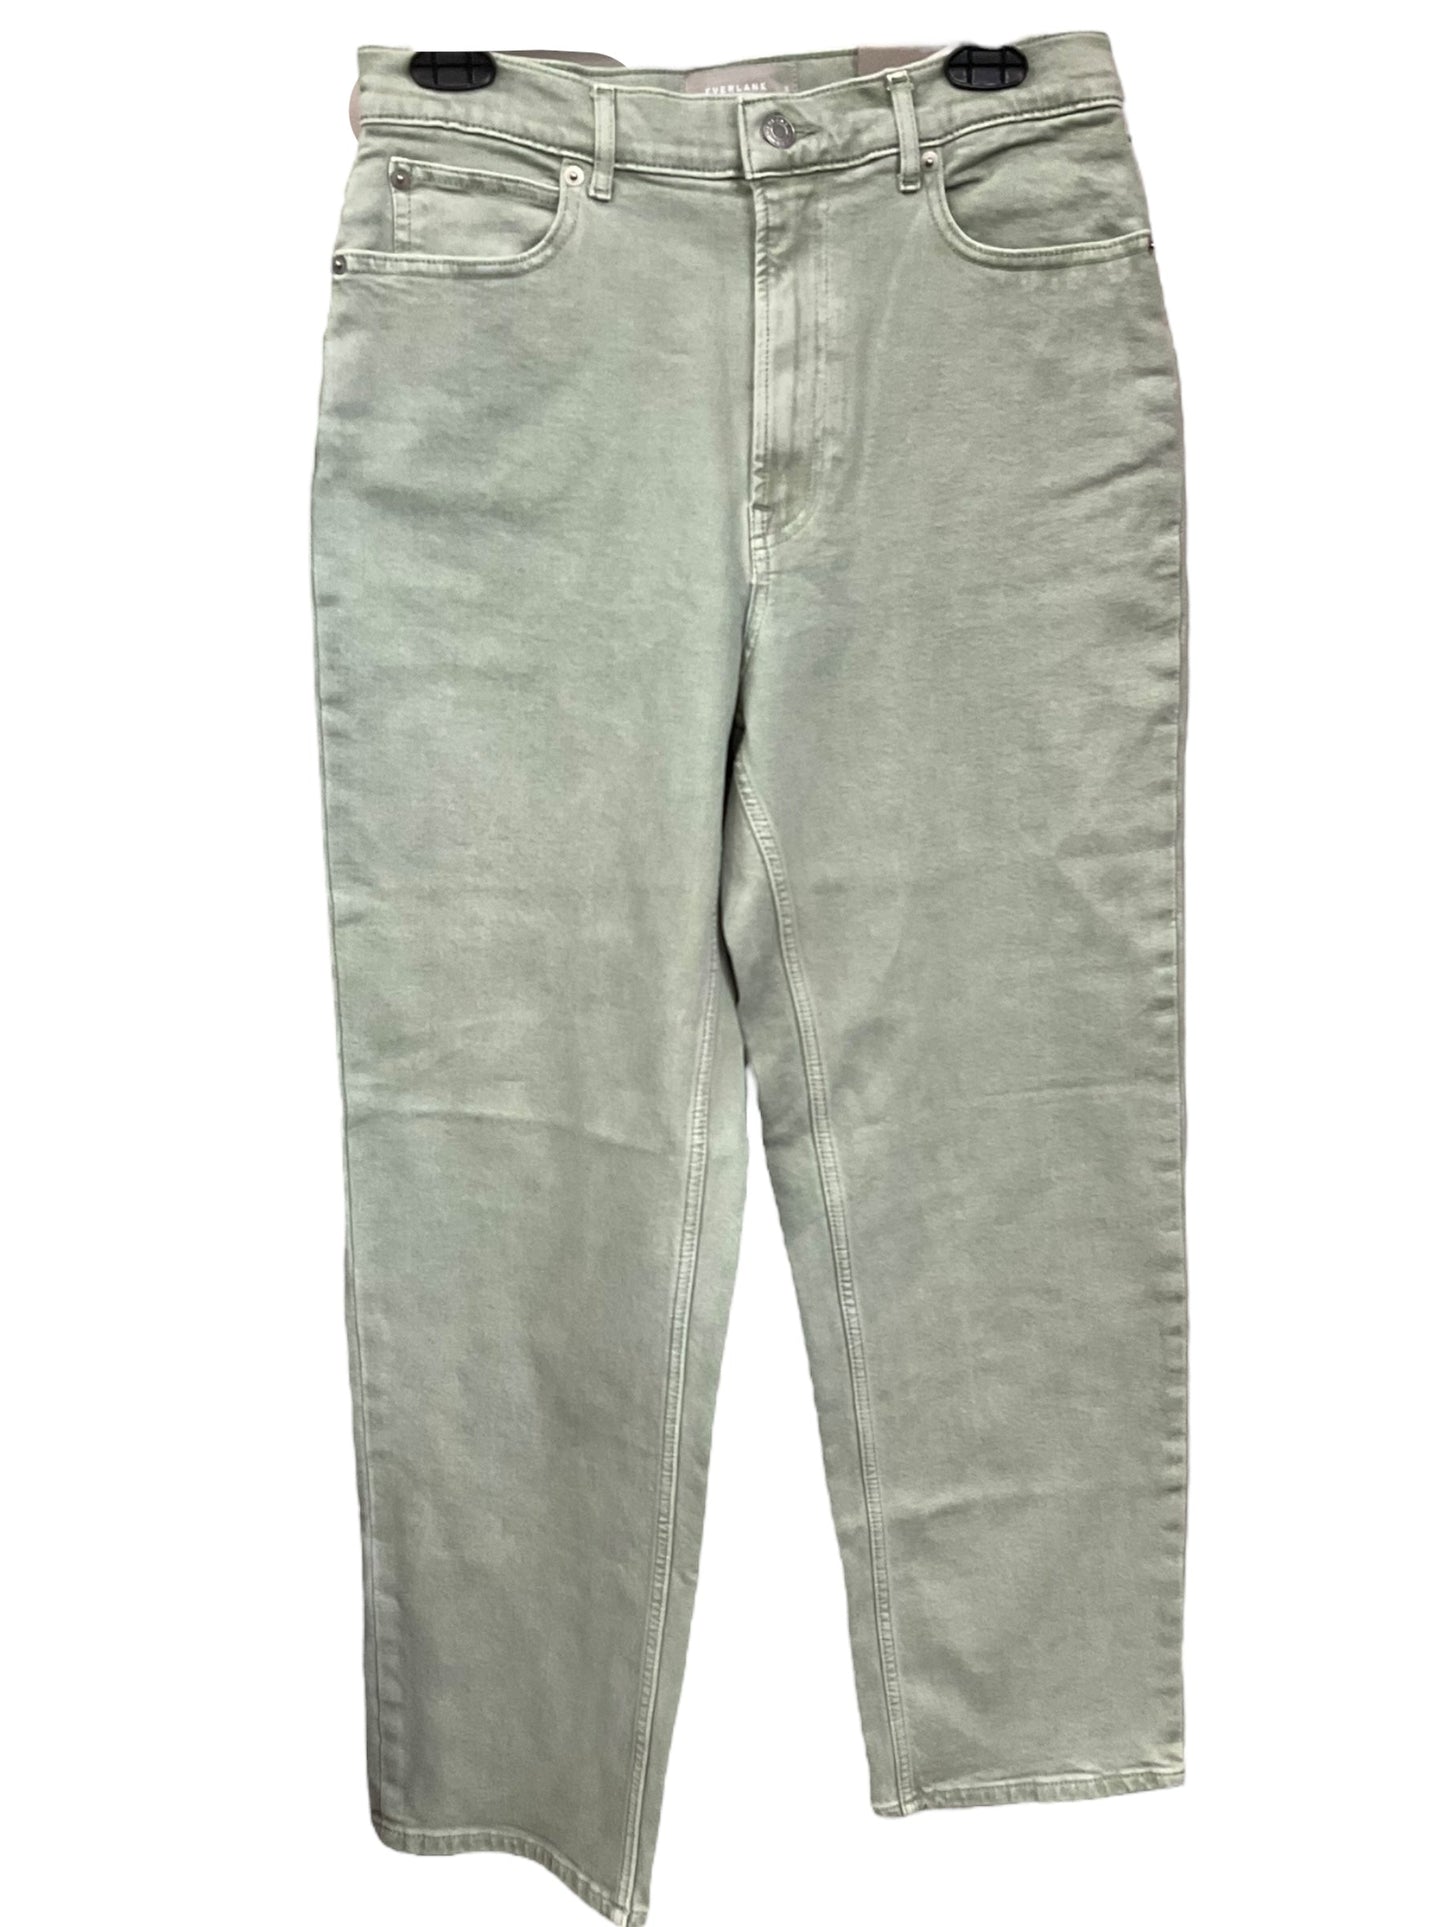 Green Jeans Straight Everlane, Size 6